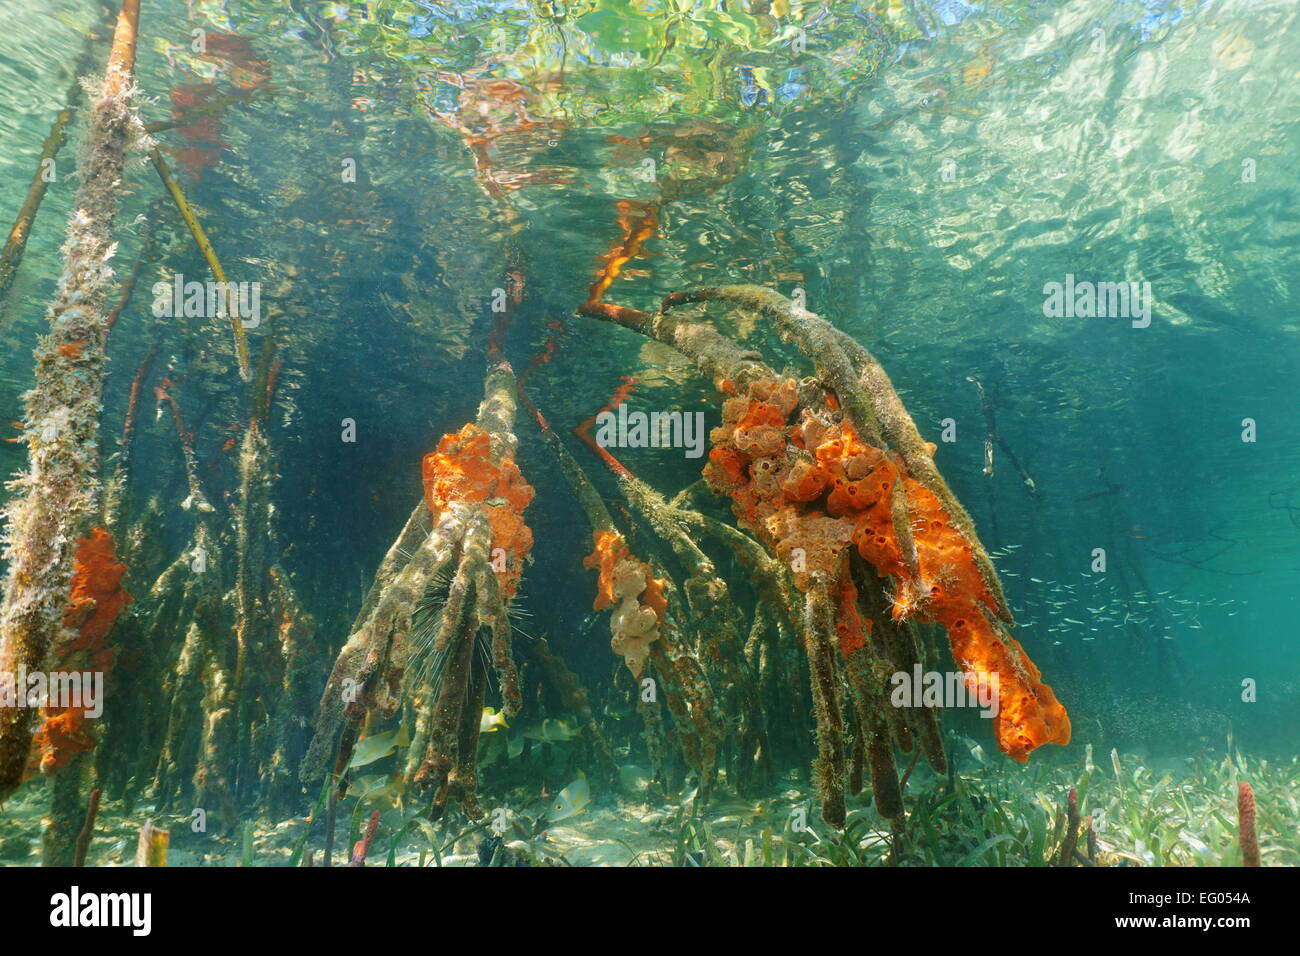 Mangrove roots underwater with red boring sponges, Caribbean sea, Panama Stock Photo